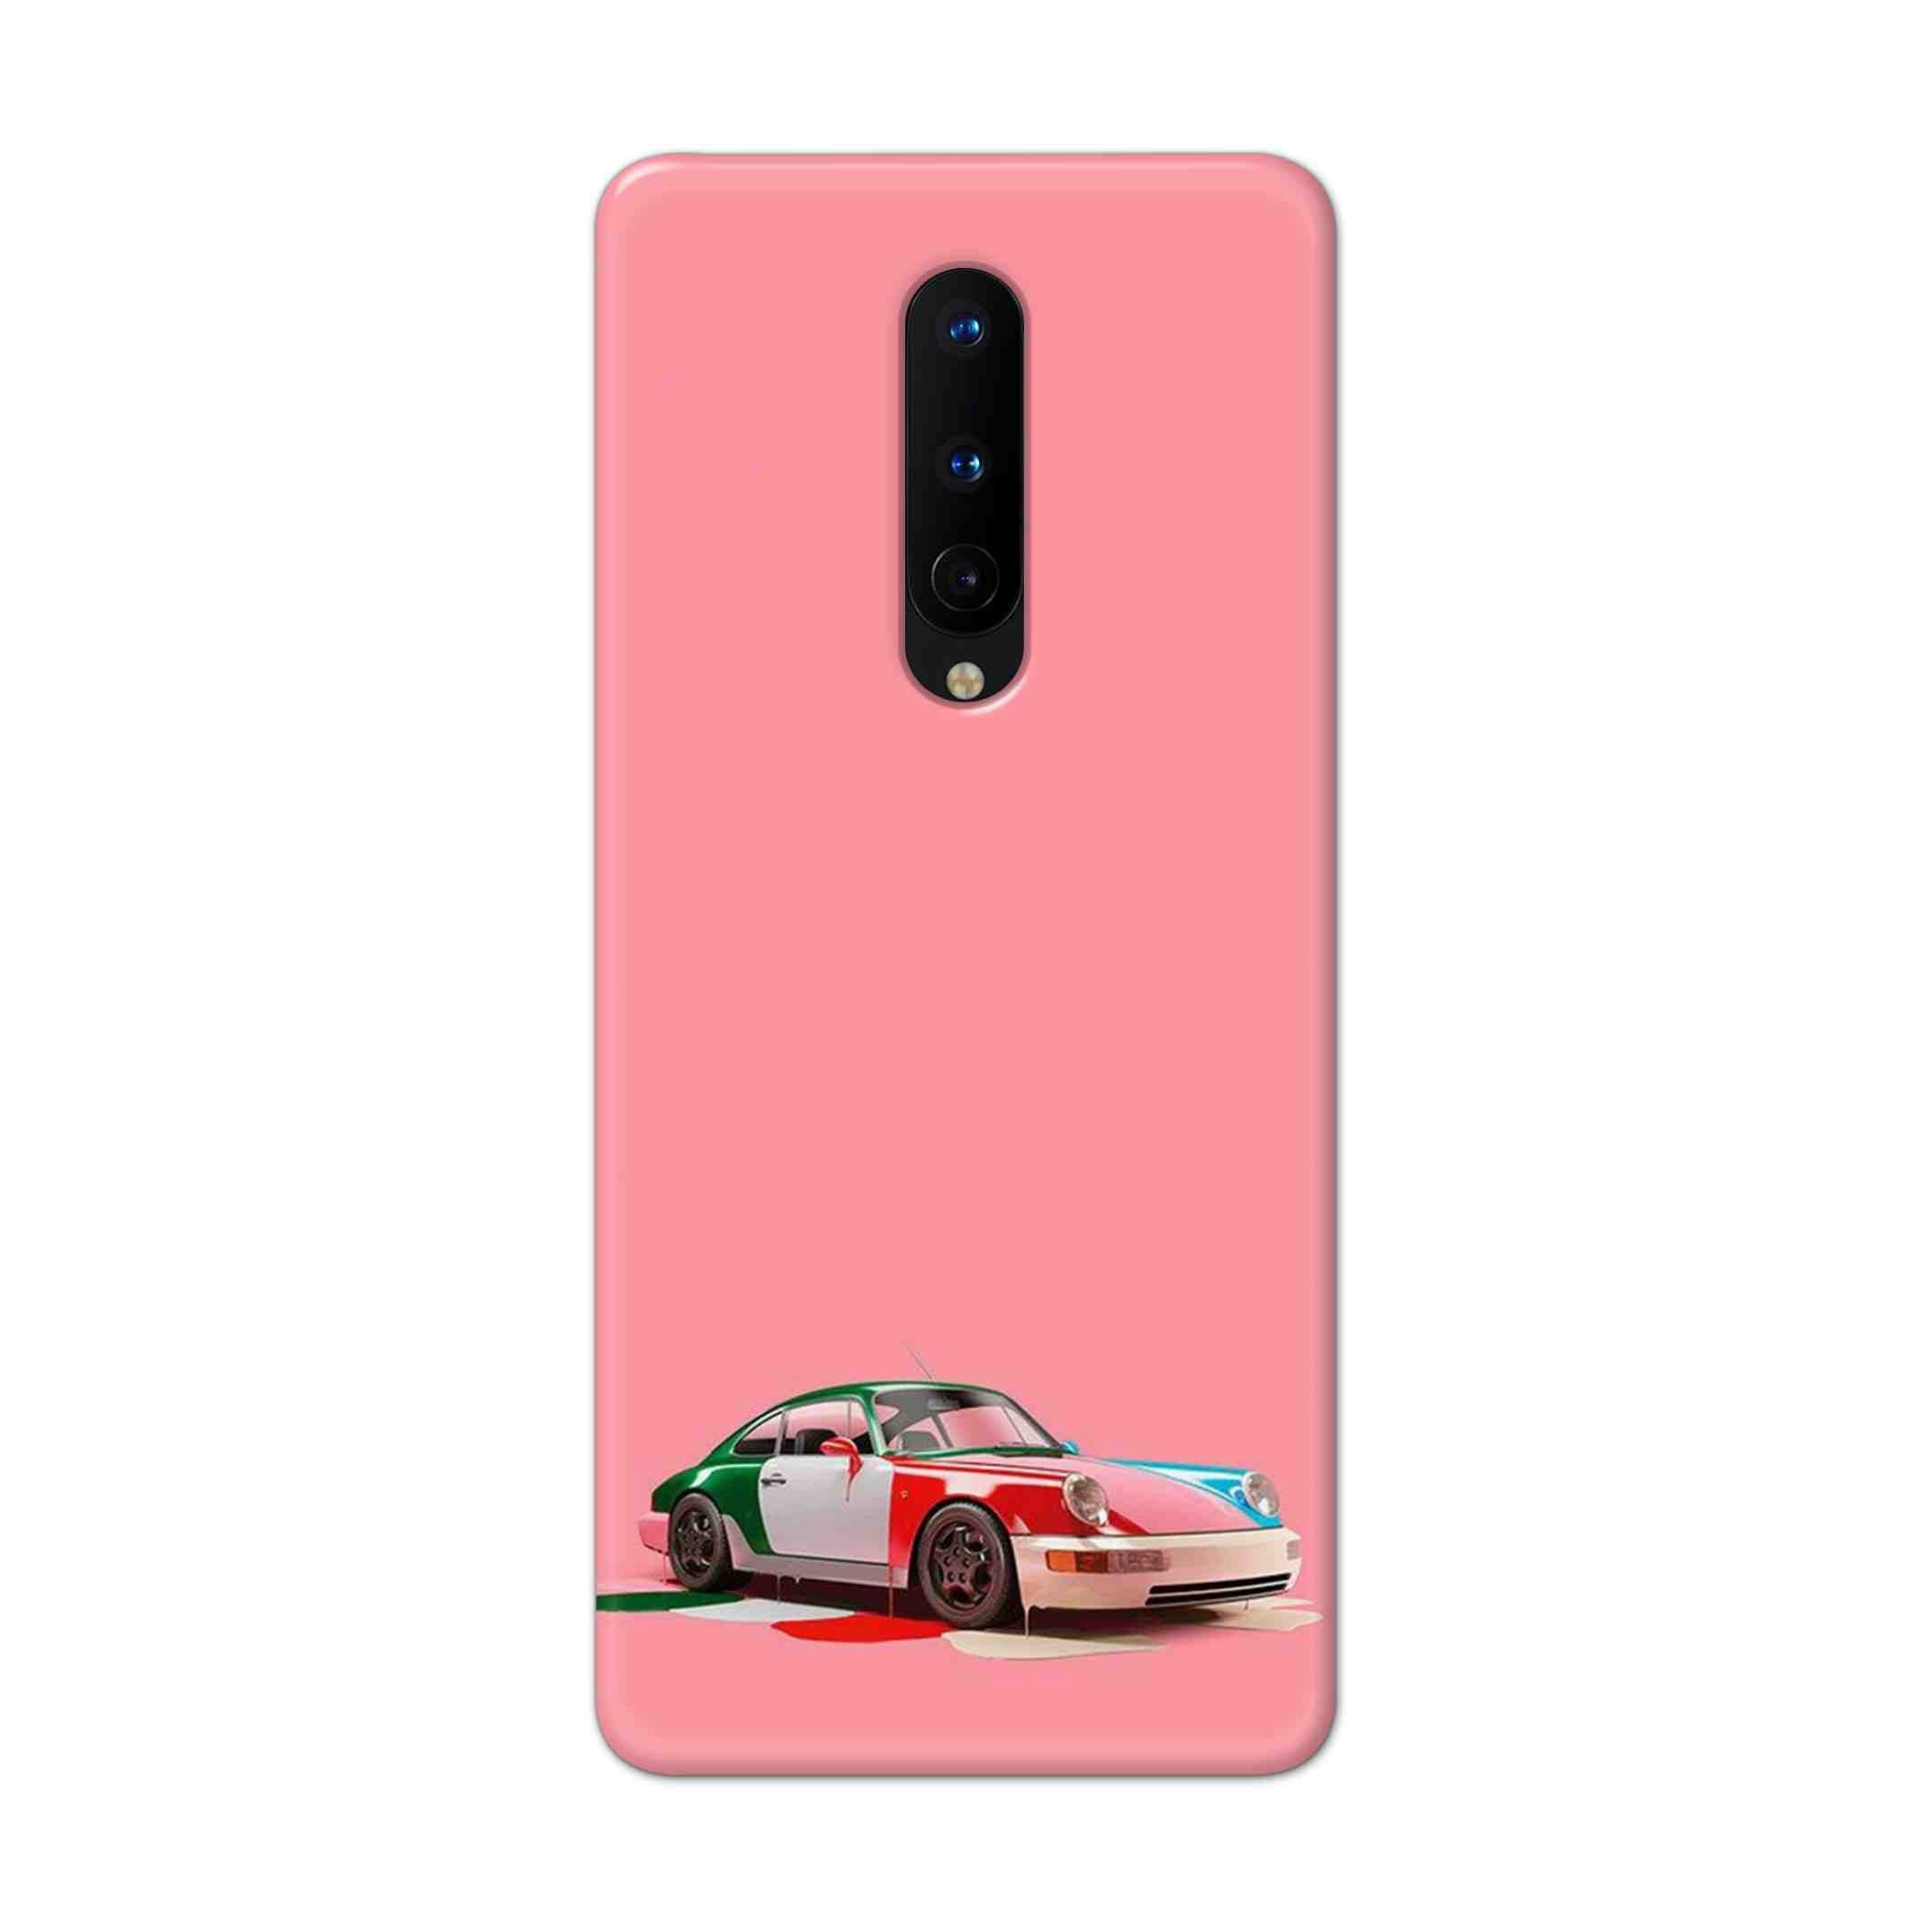 Buy Pink Porche Hard Back Mobile Phone Case Cover For OnePlus 8 Online